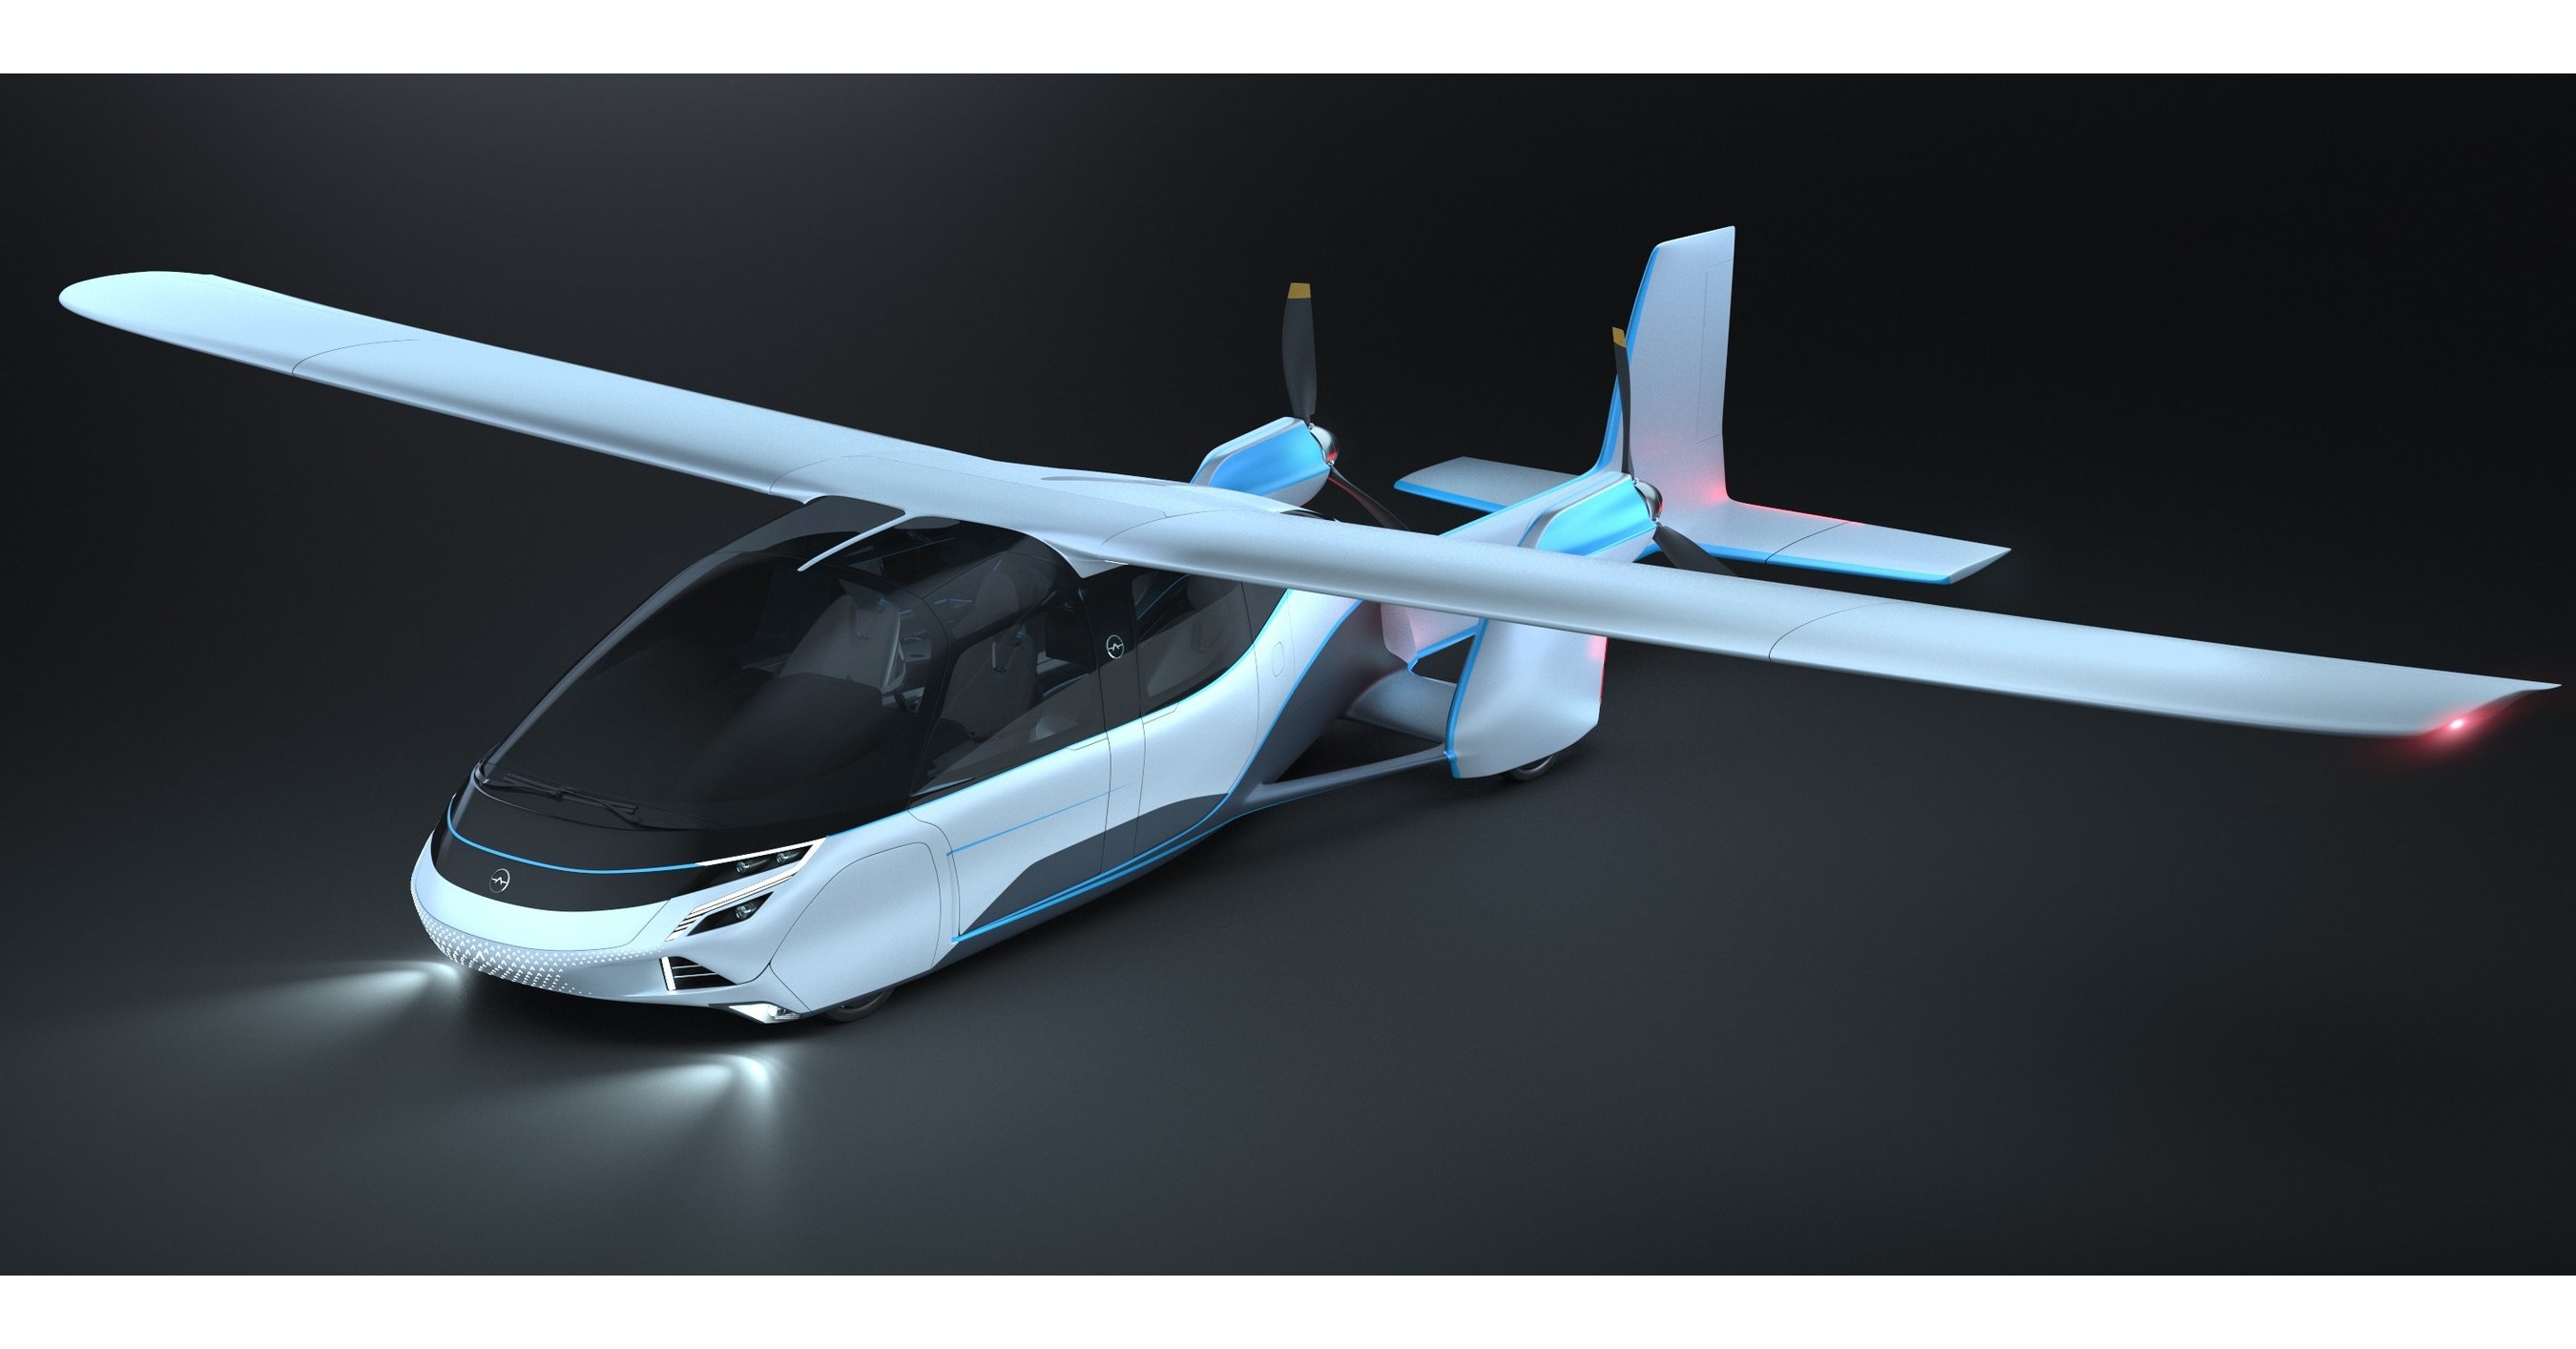 Why has a flying car not been invented properly so far? Are we